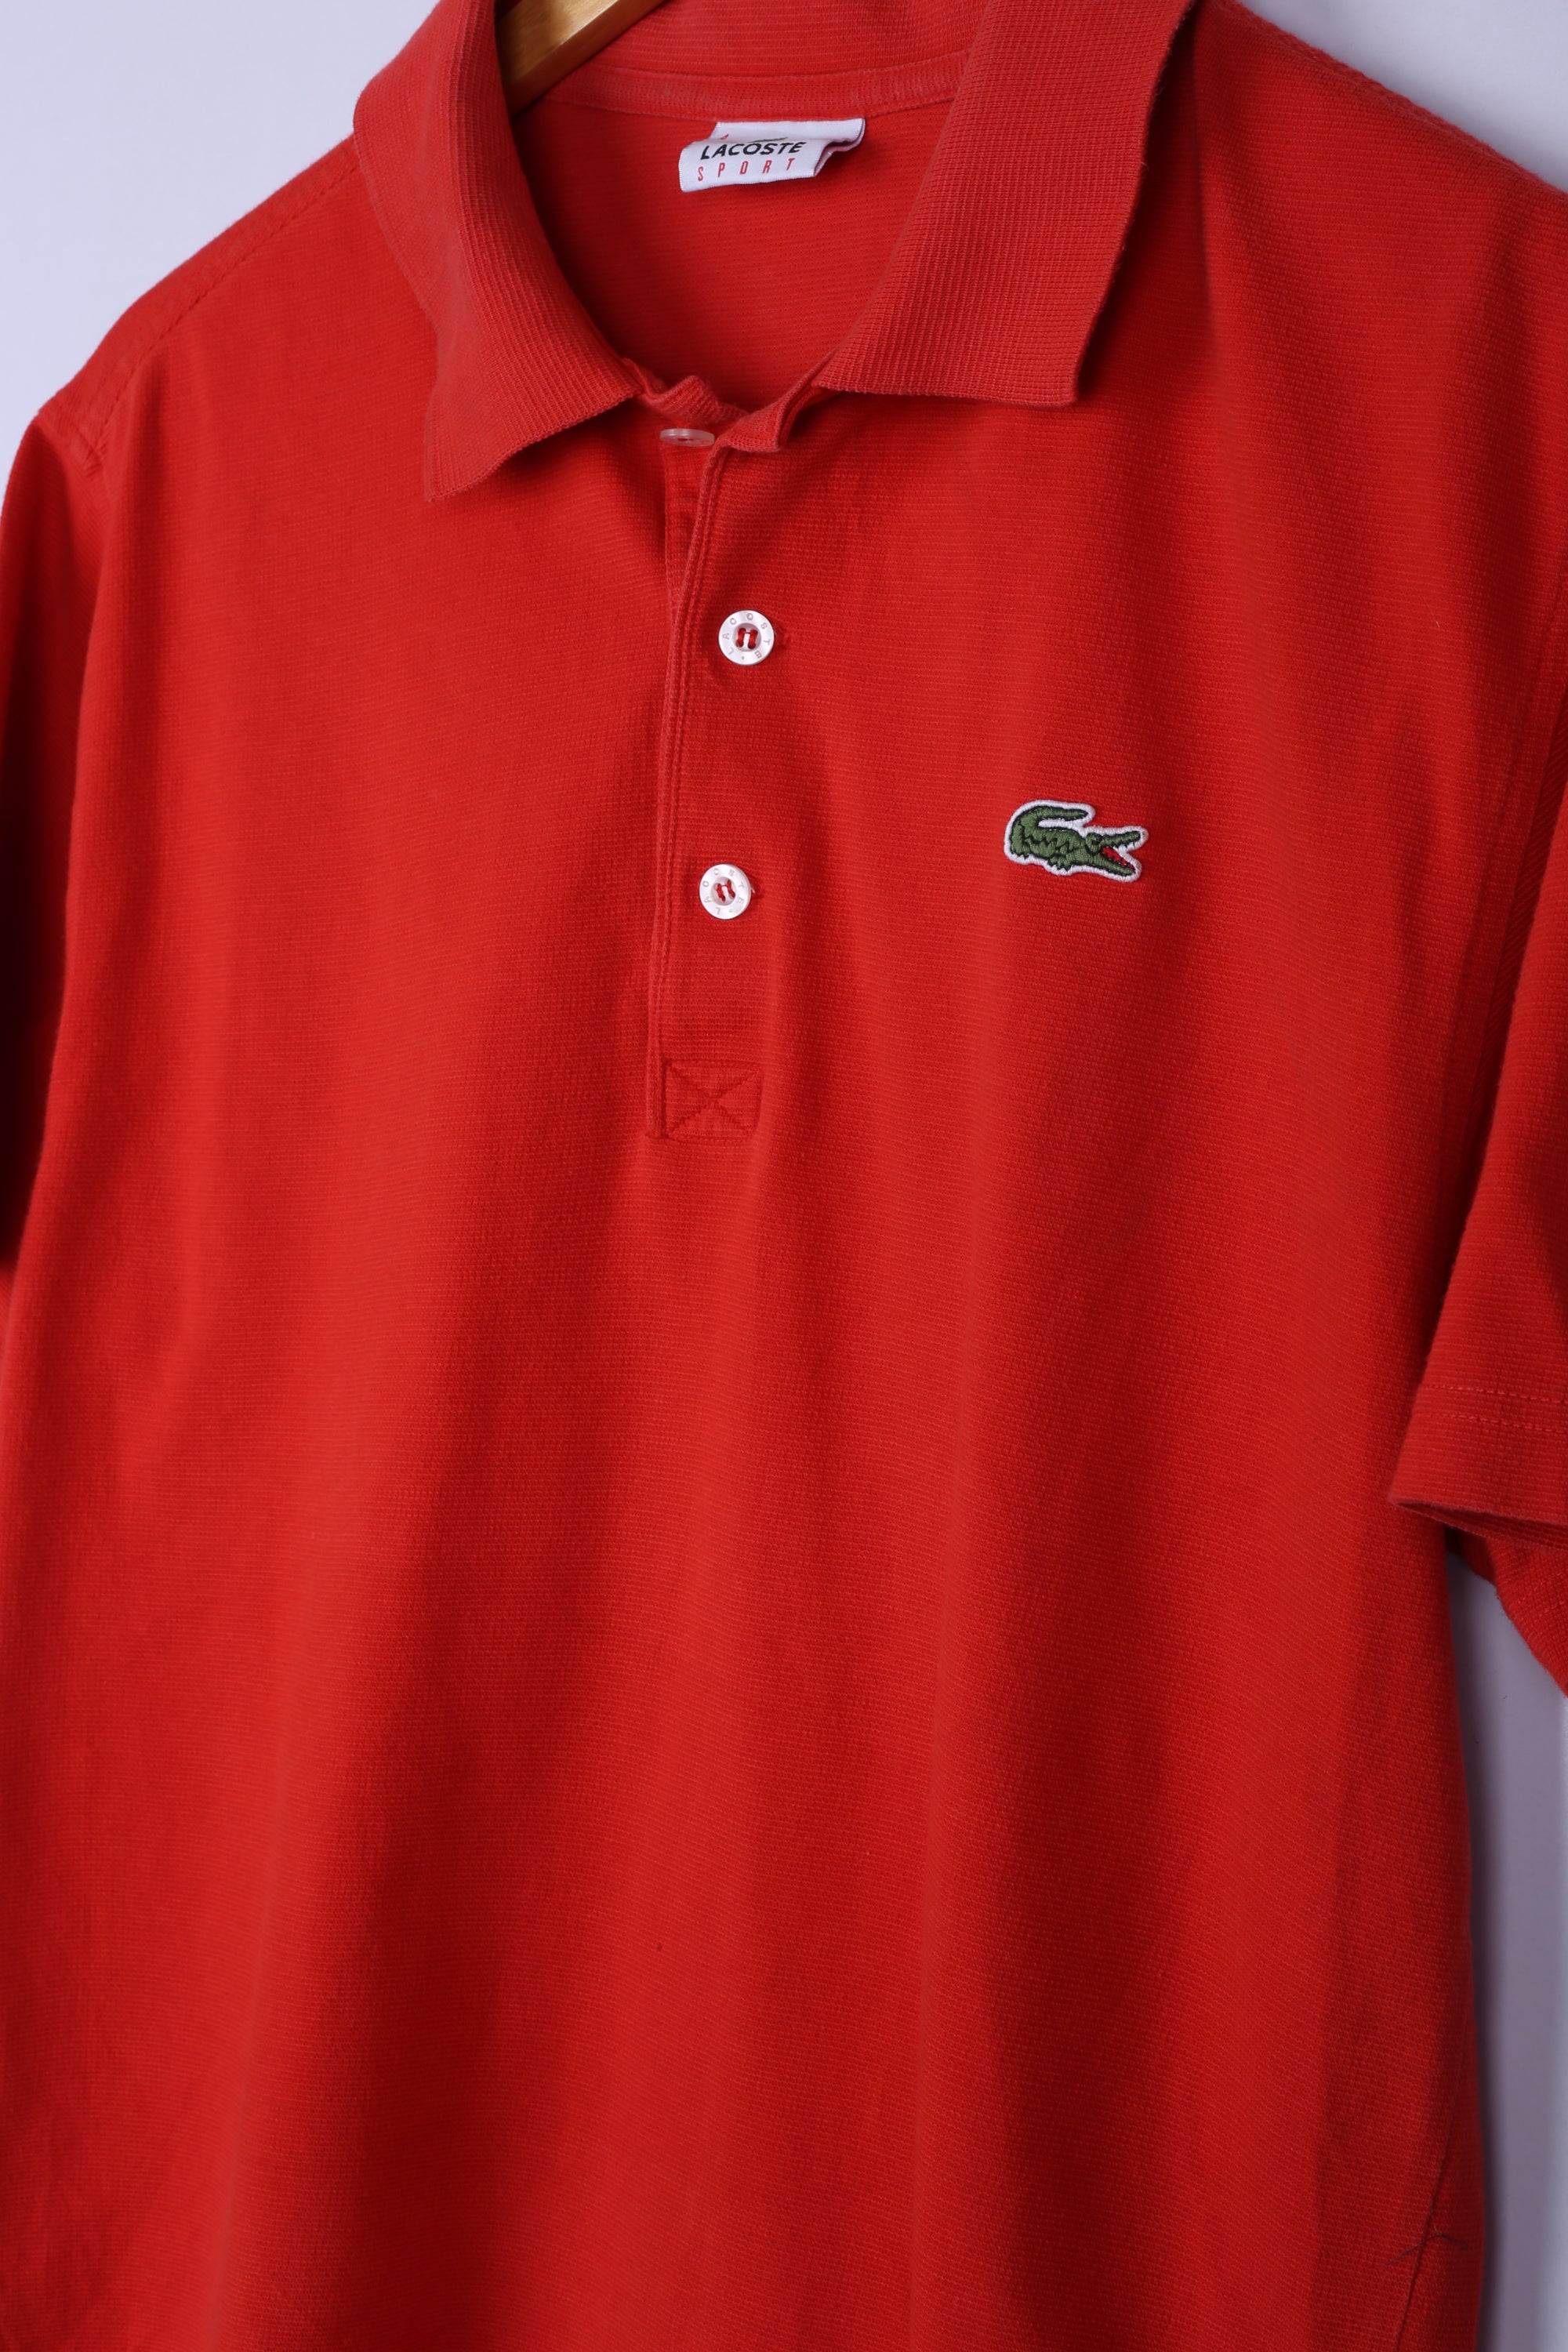 Vintage 90's Lacoste Polo Red